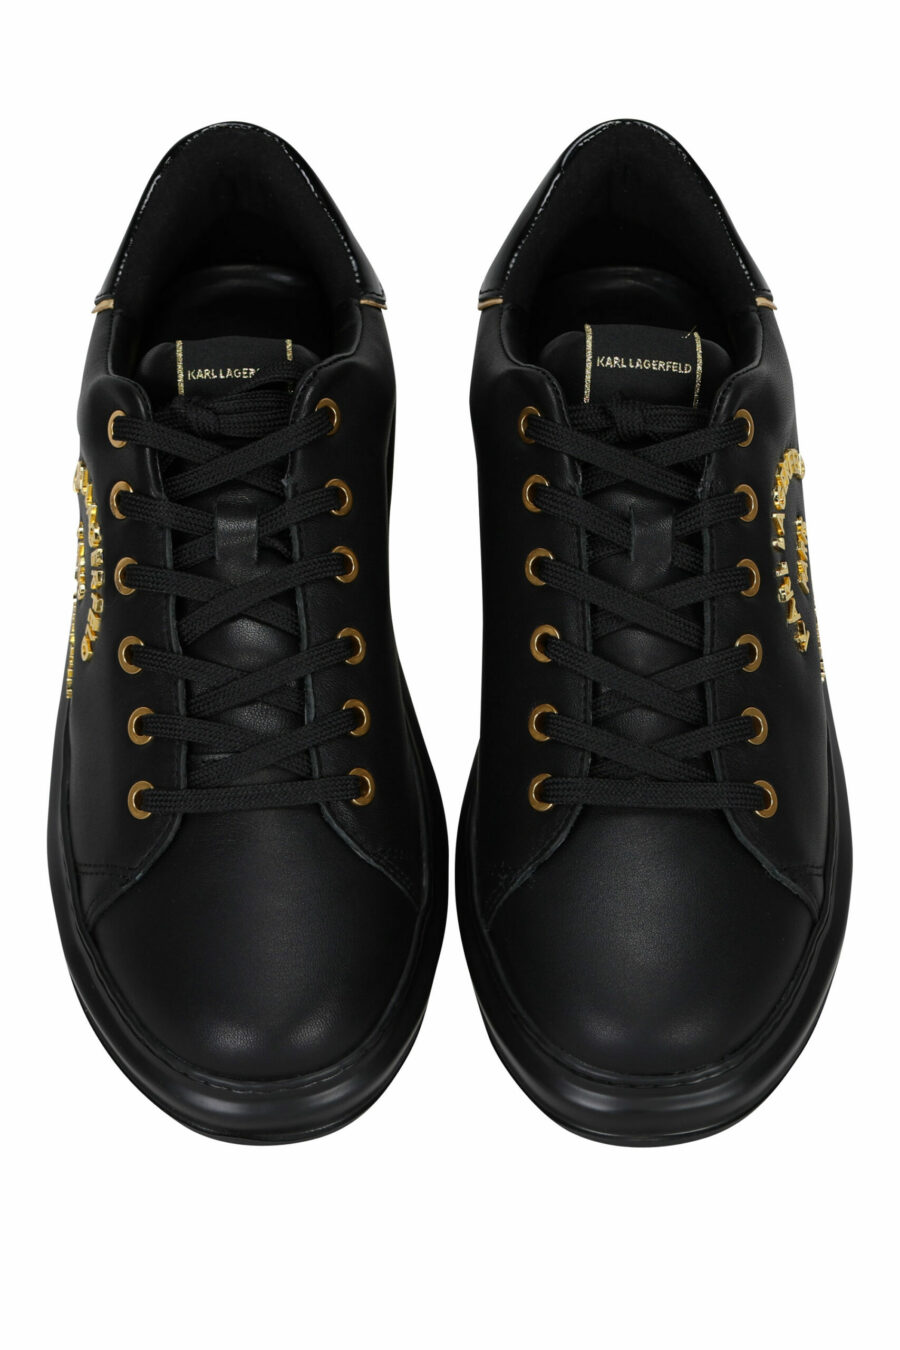 Black trainers with golden "rue st guillaume" logo in metal - 5059529362699 4 scaled